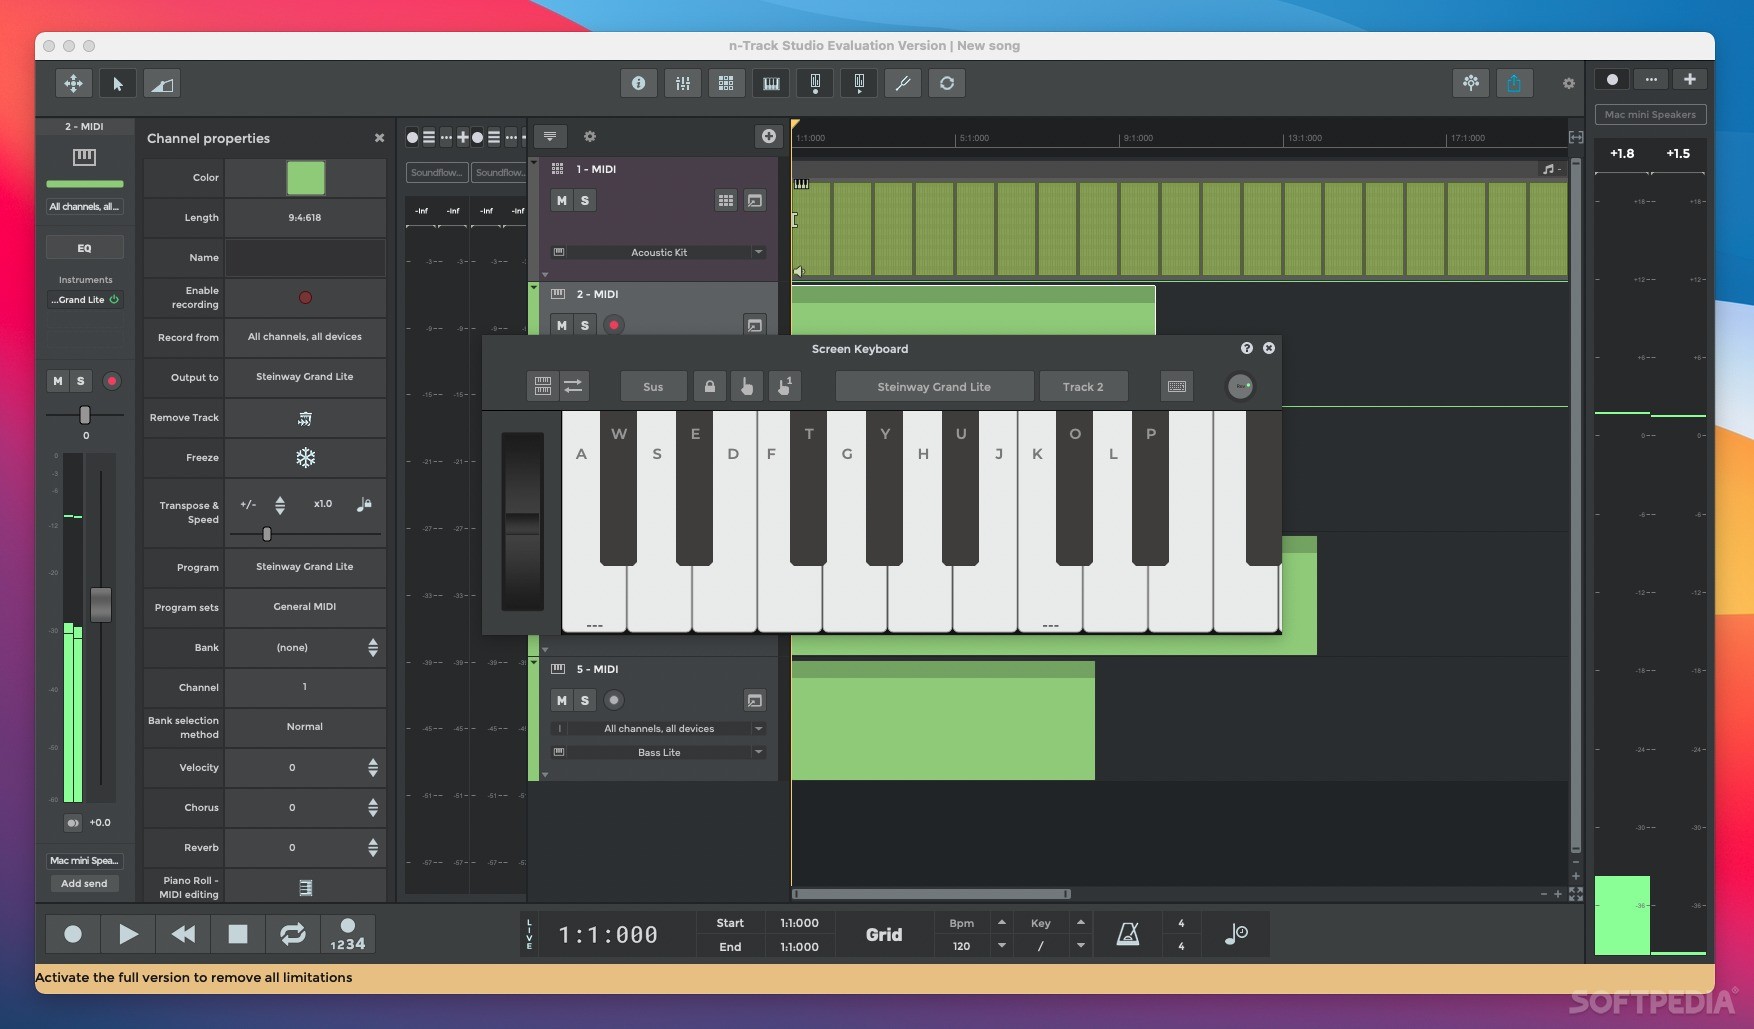 n-Track Studio 10.0.0.8212 download the new version for windows